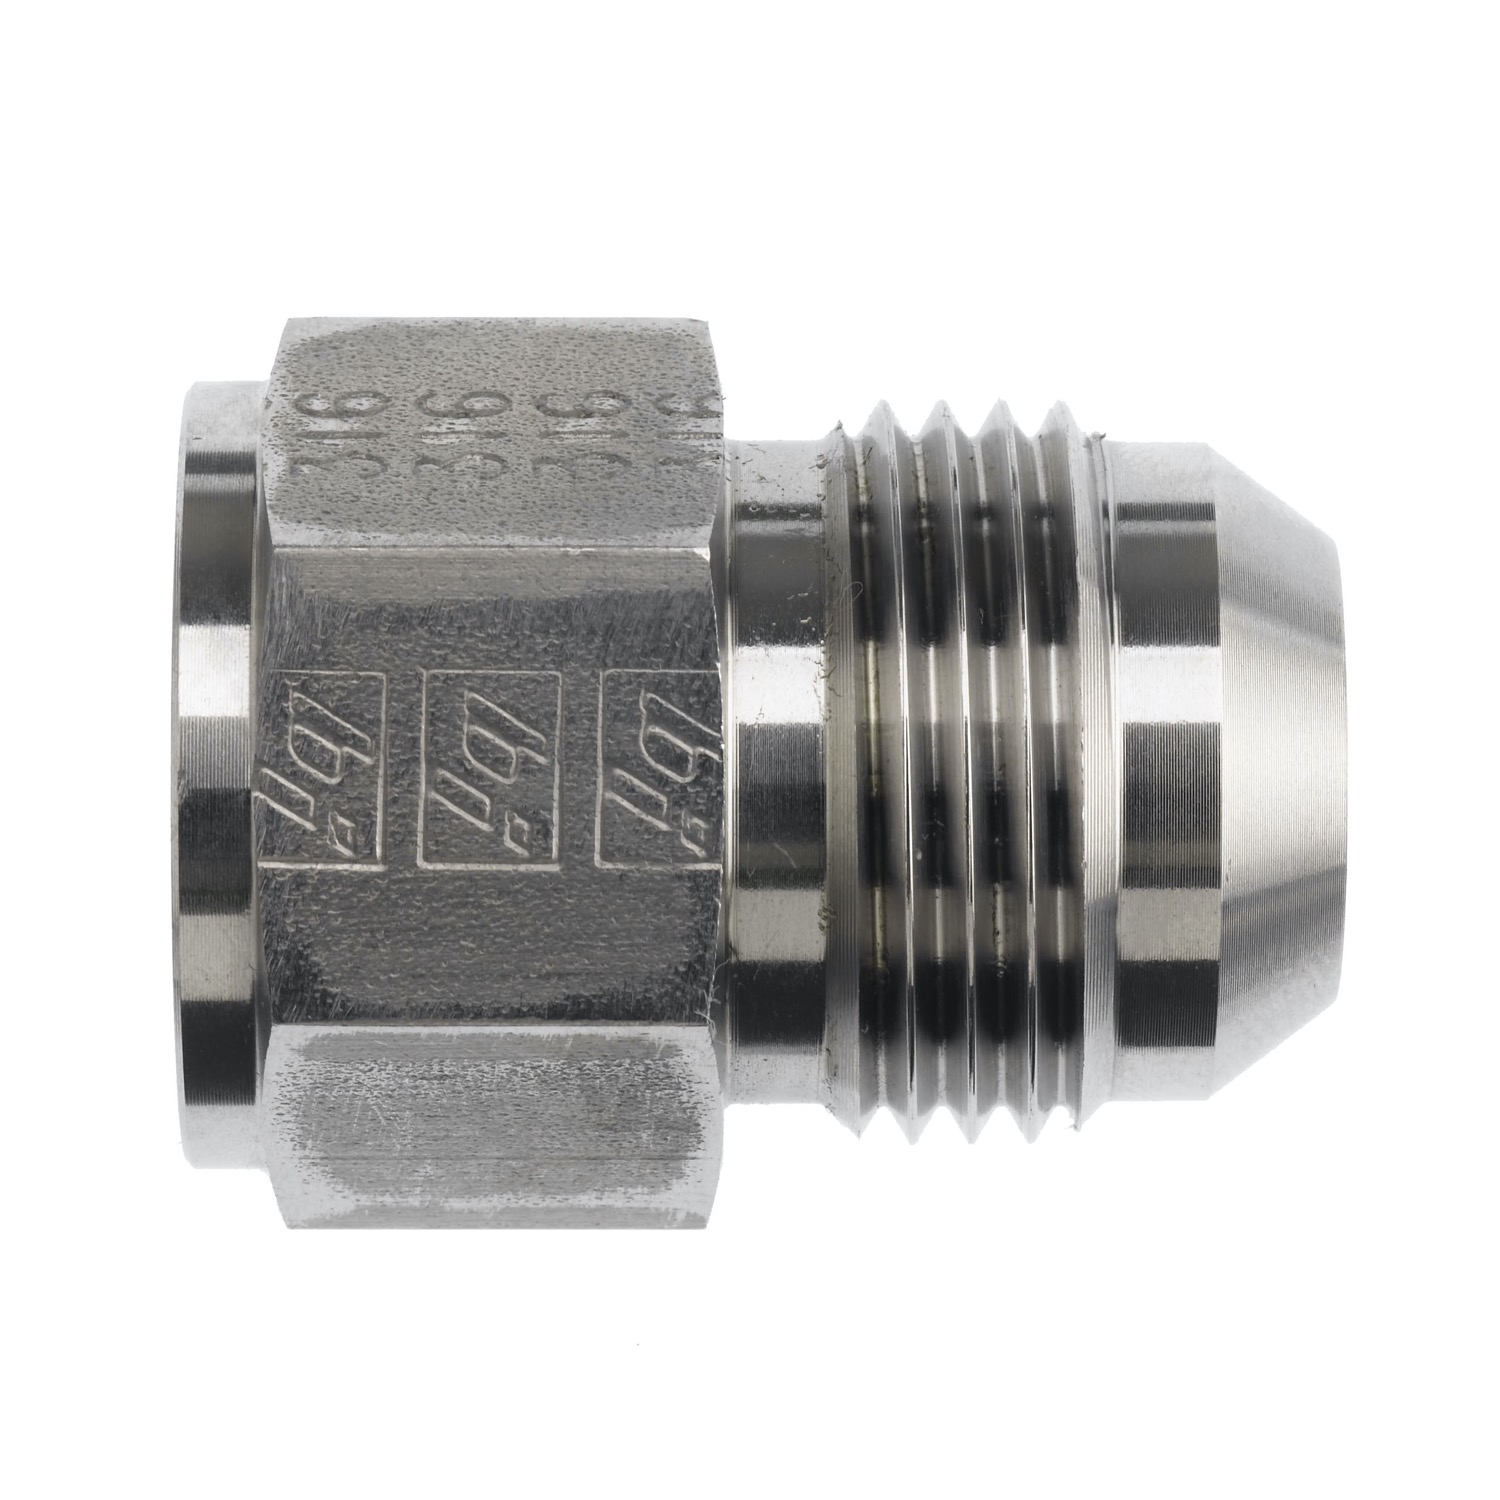 Hydraulic Hose Adapters - Straight Reducer Fitting, JIC 37° Flare, 2406 Series 2406-16-12-IN